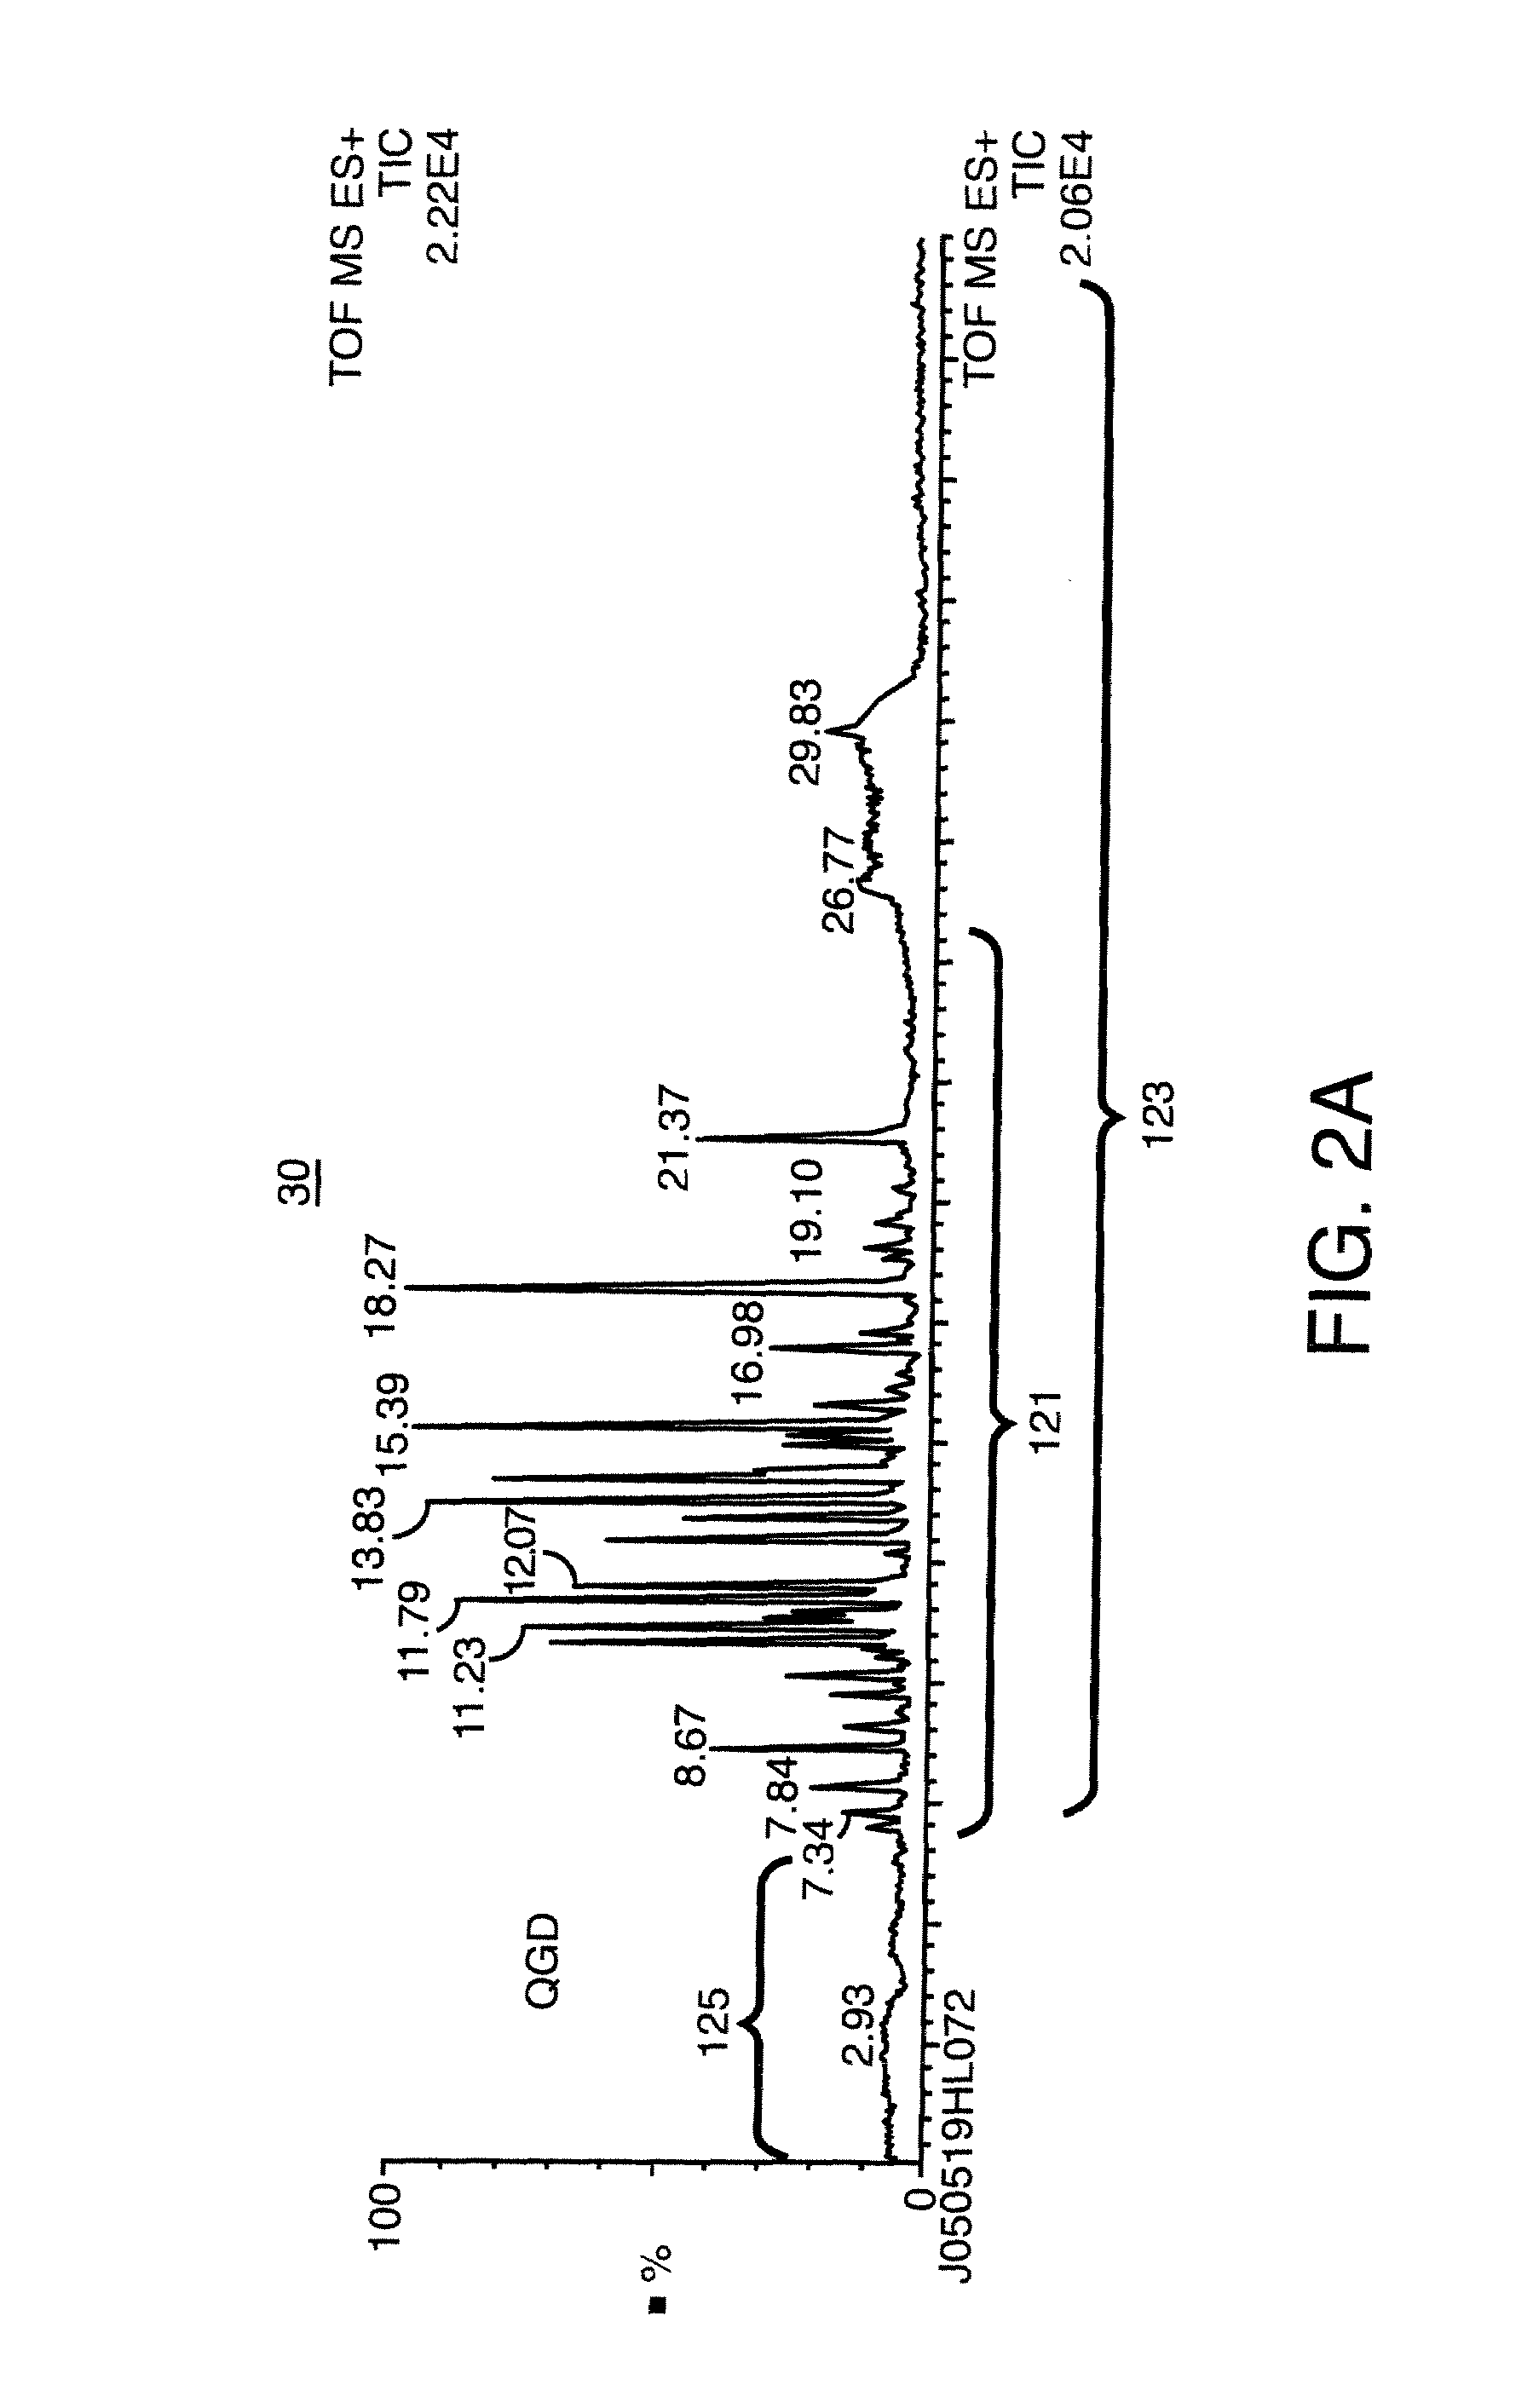 Methods and apparatus for generating solvent gradients in liquid chromatography